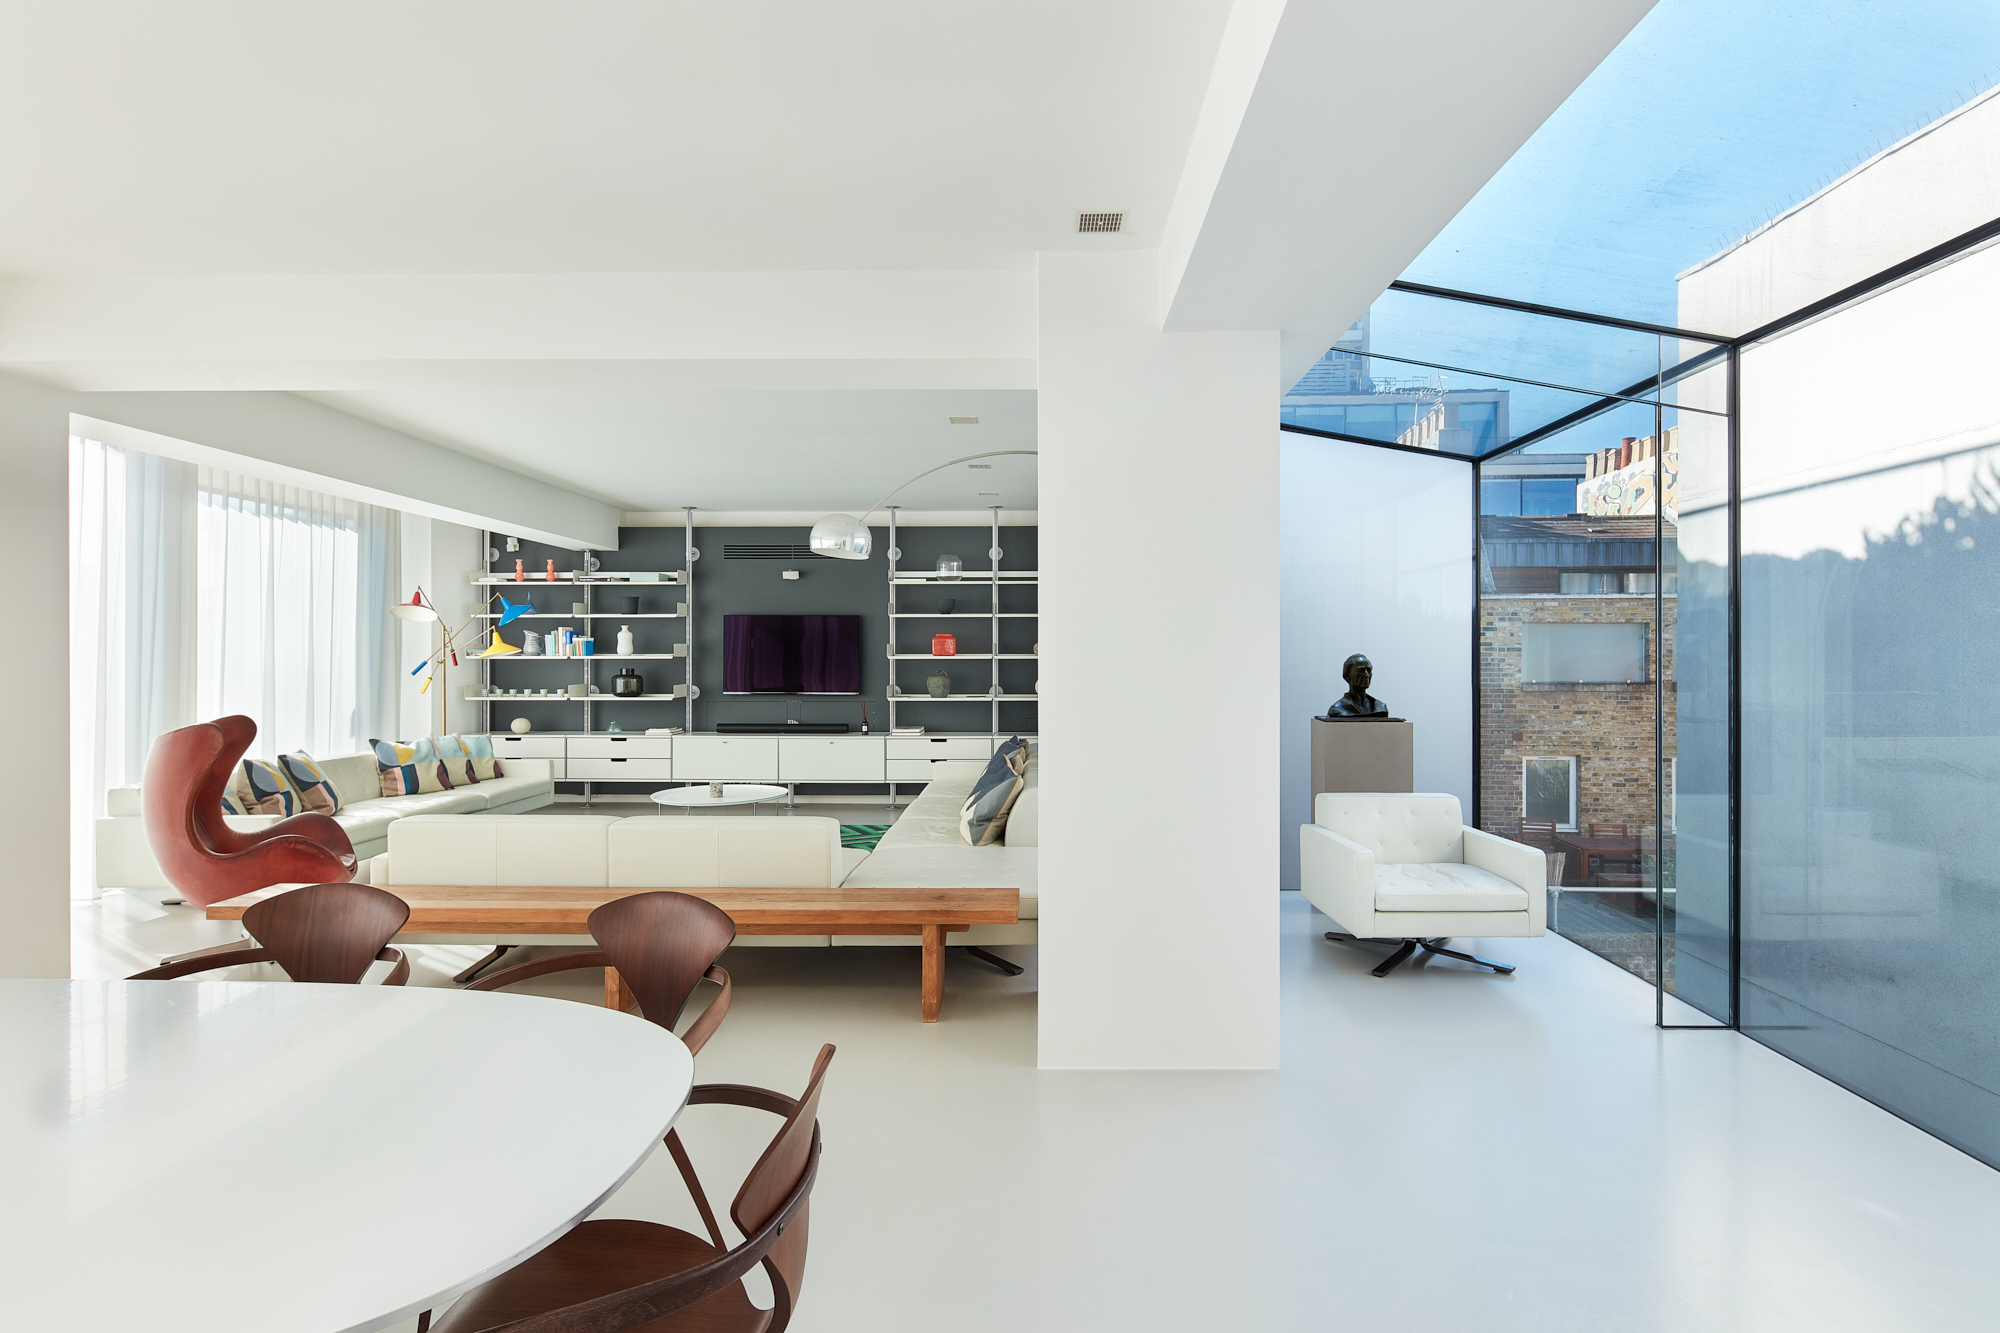 Architect-designed minimalist living room of a four-bedroom triplex for sale in Notting Hill